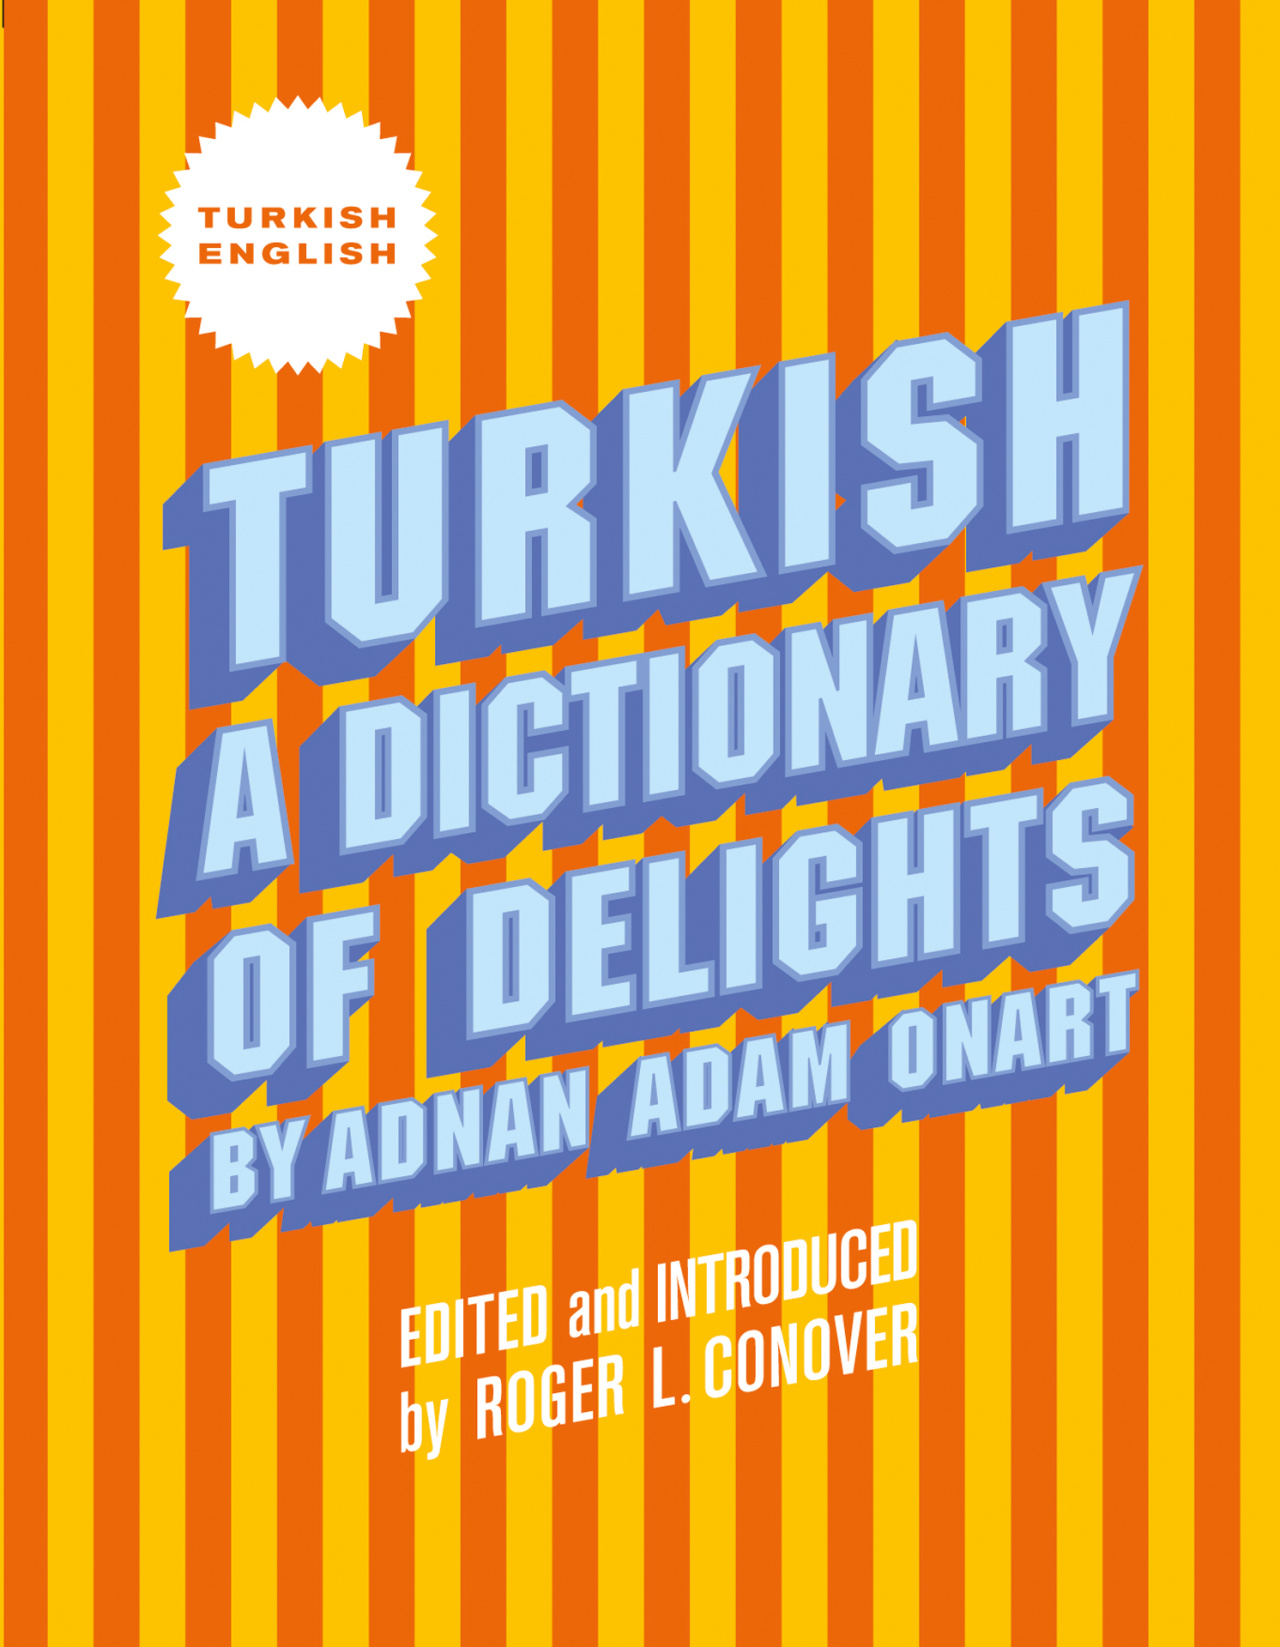 Cover der Publikation »Turkish. A Dictionary of Delights«